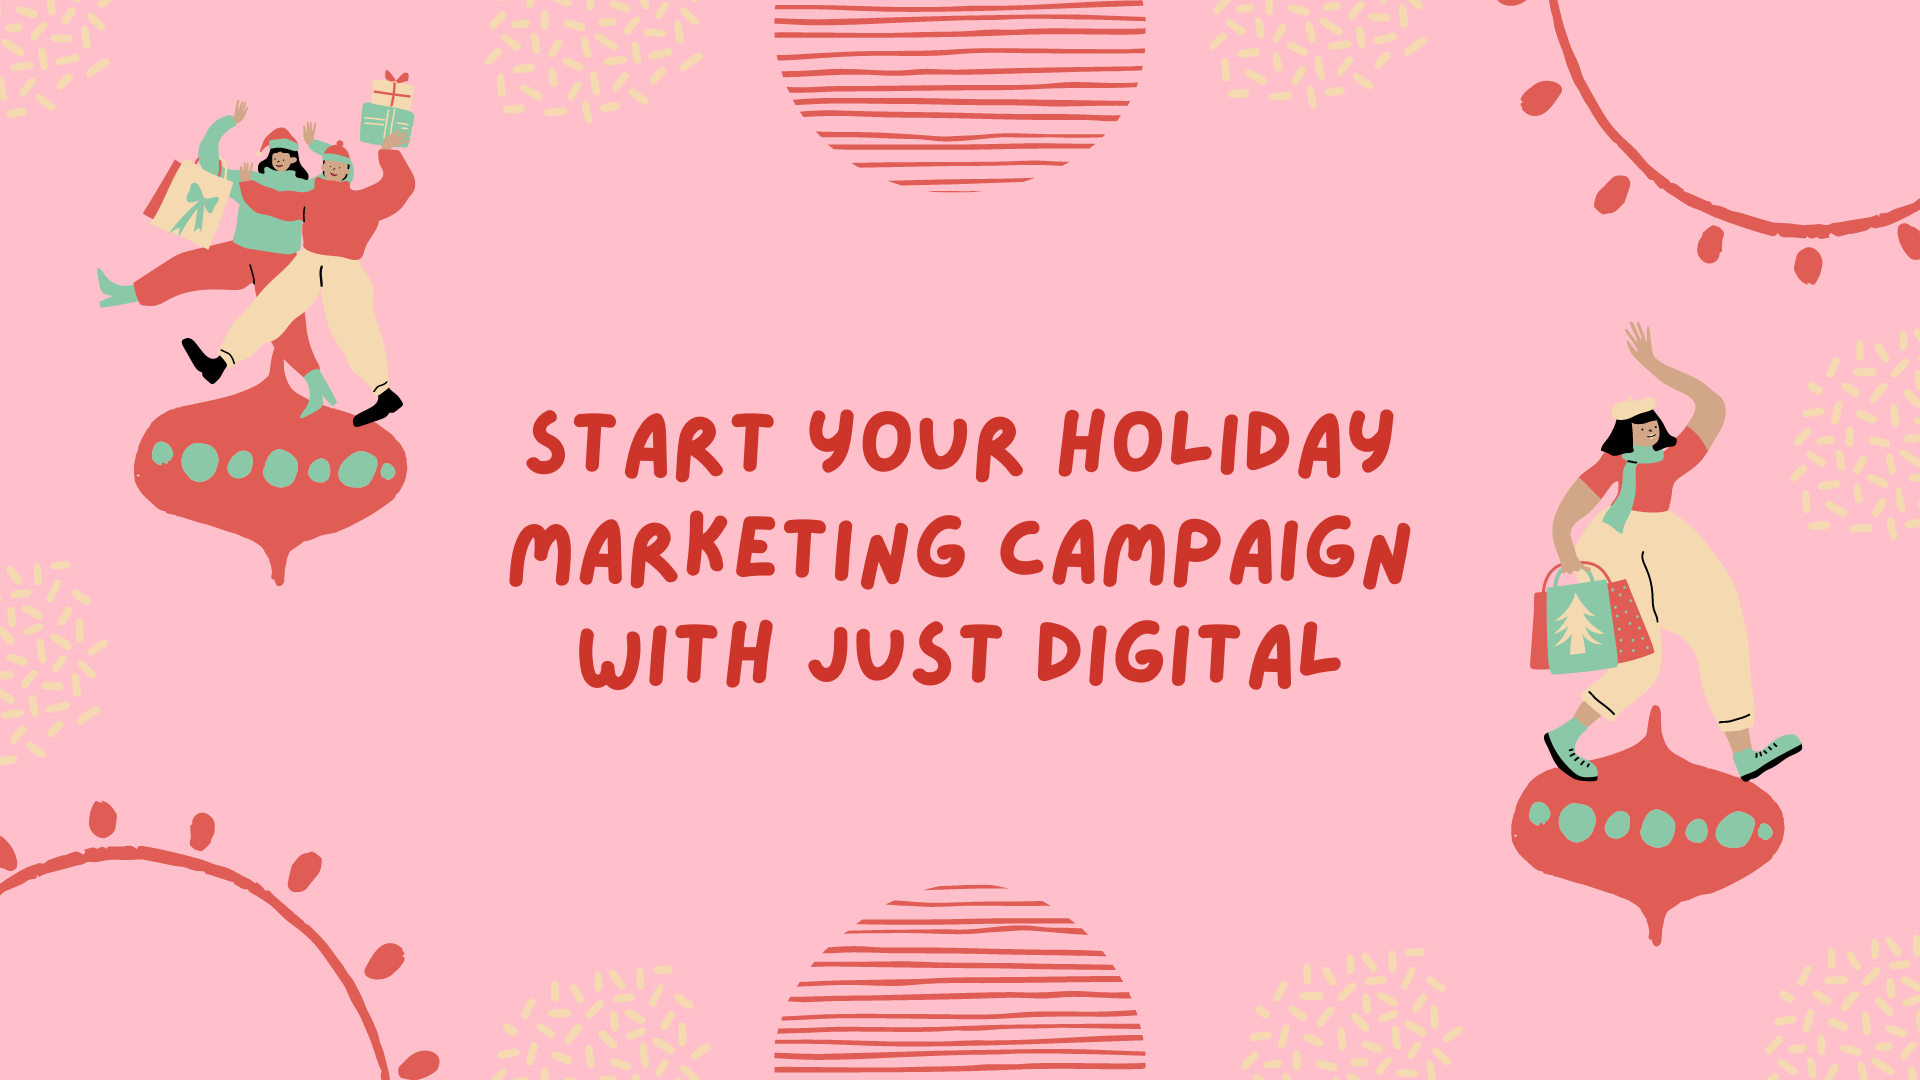 Start your holiday marketing campaign with just digital